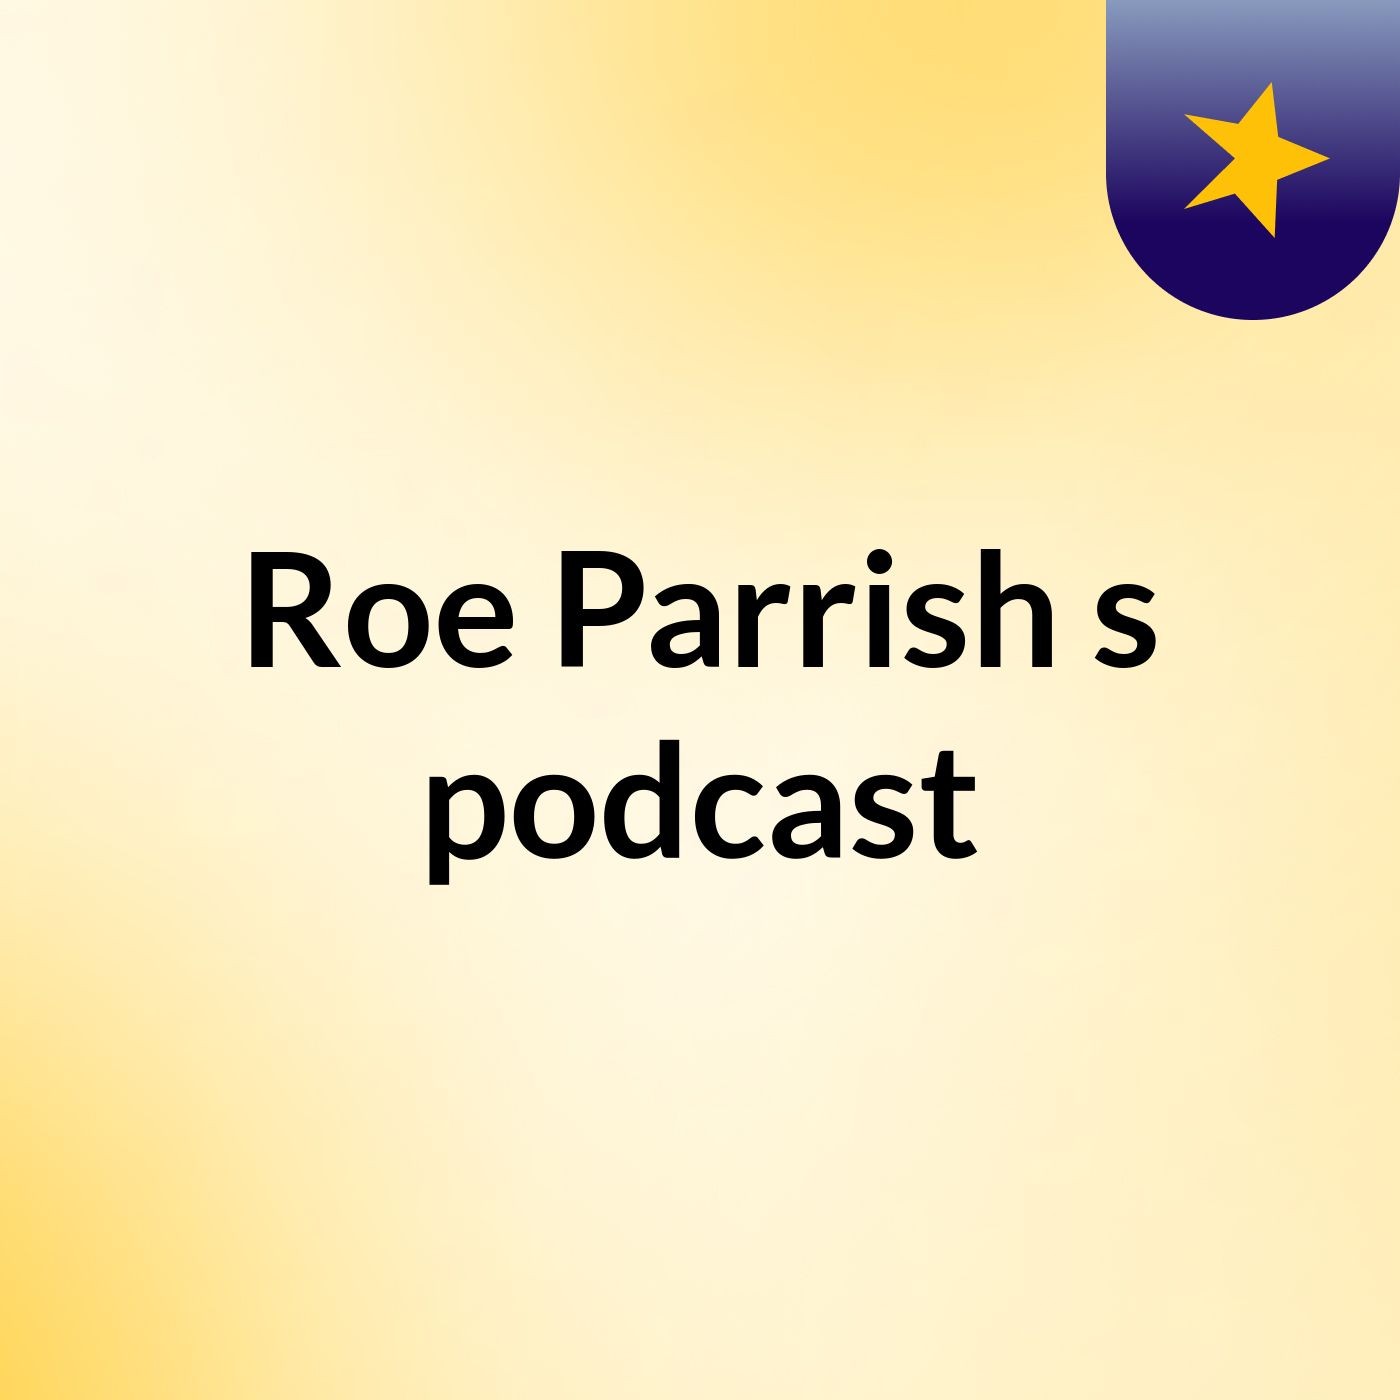 Roe Parrish's podcast